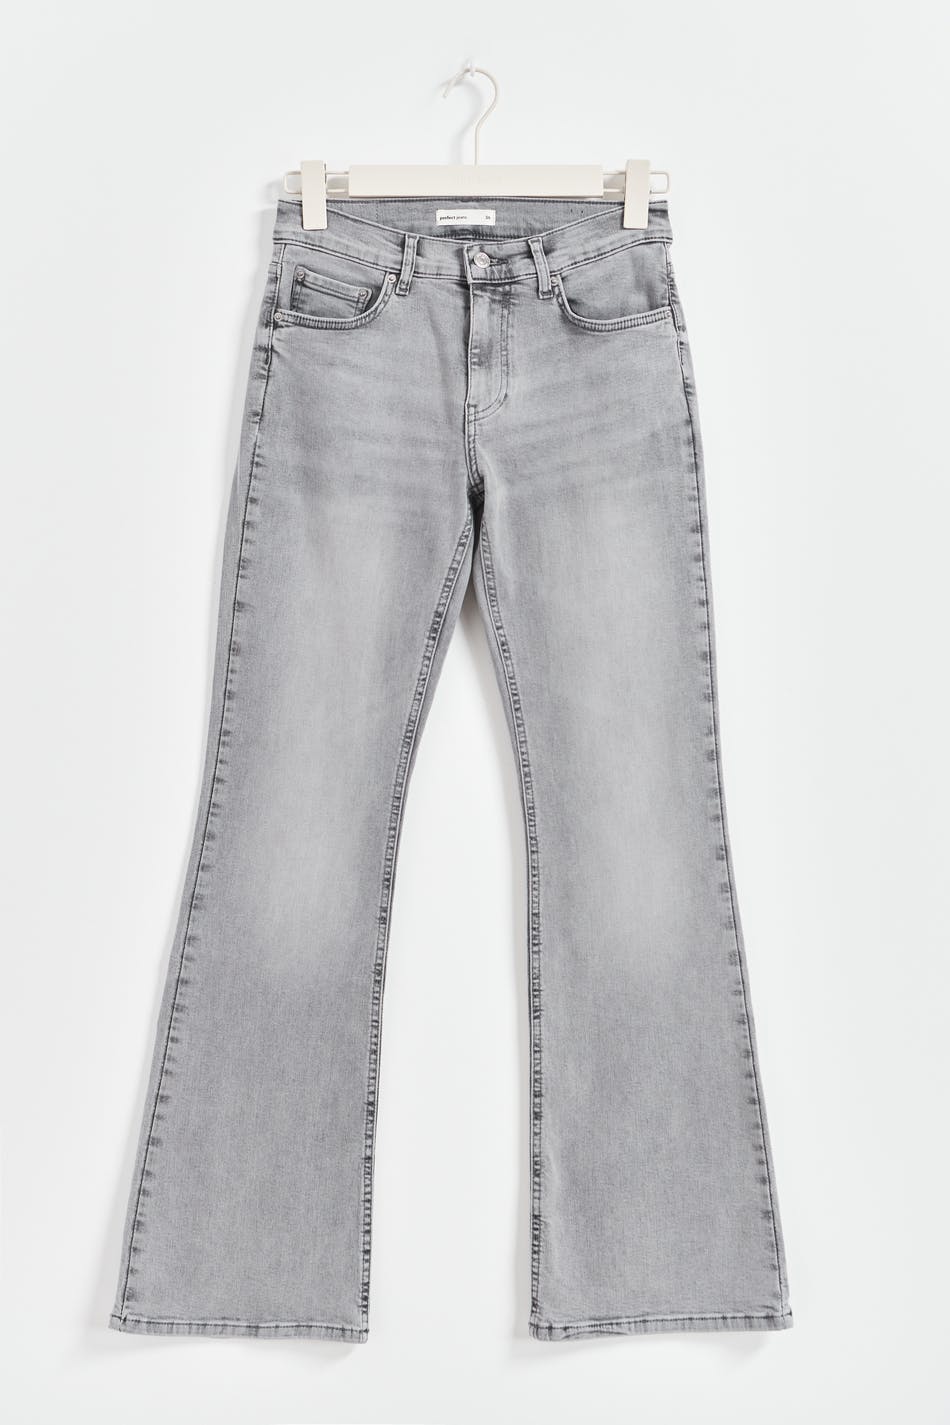 Low straight petite jeans - Grey - Women - Gina Tricot